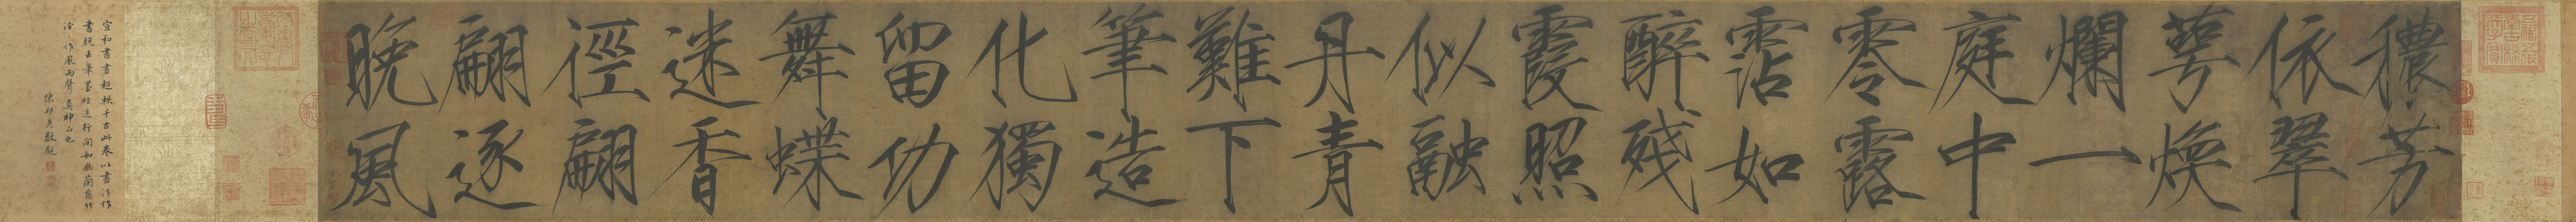 Chinese Letter Calligraphy Chinese Characters 23451x2020